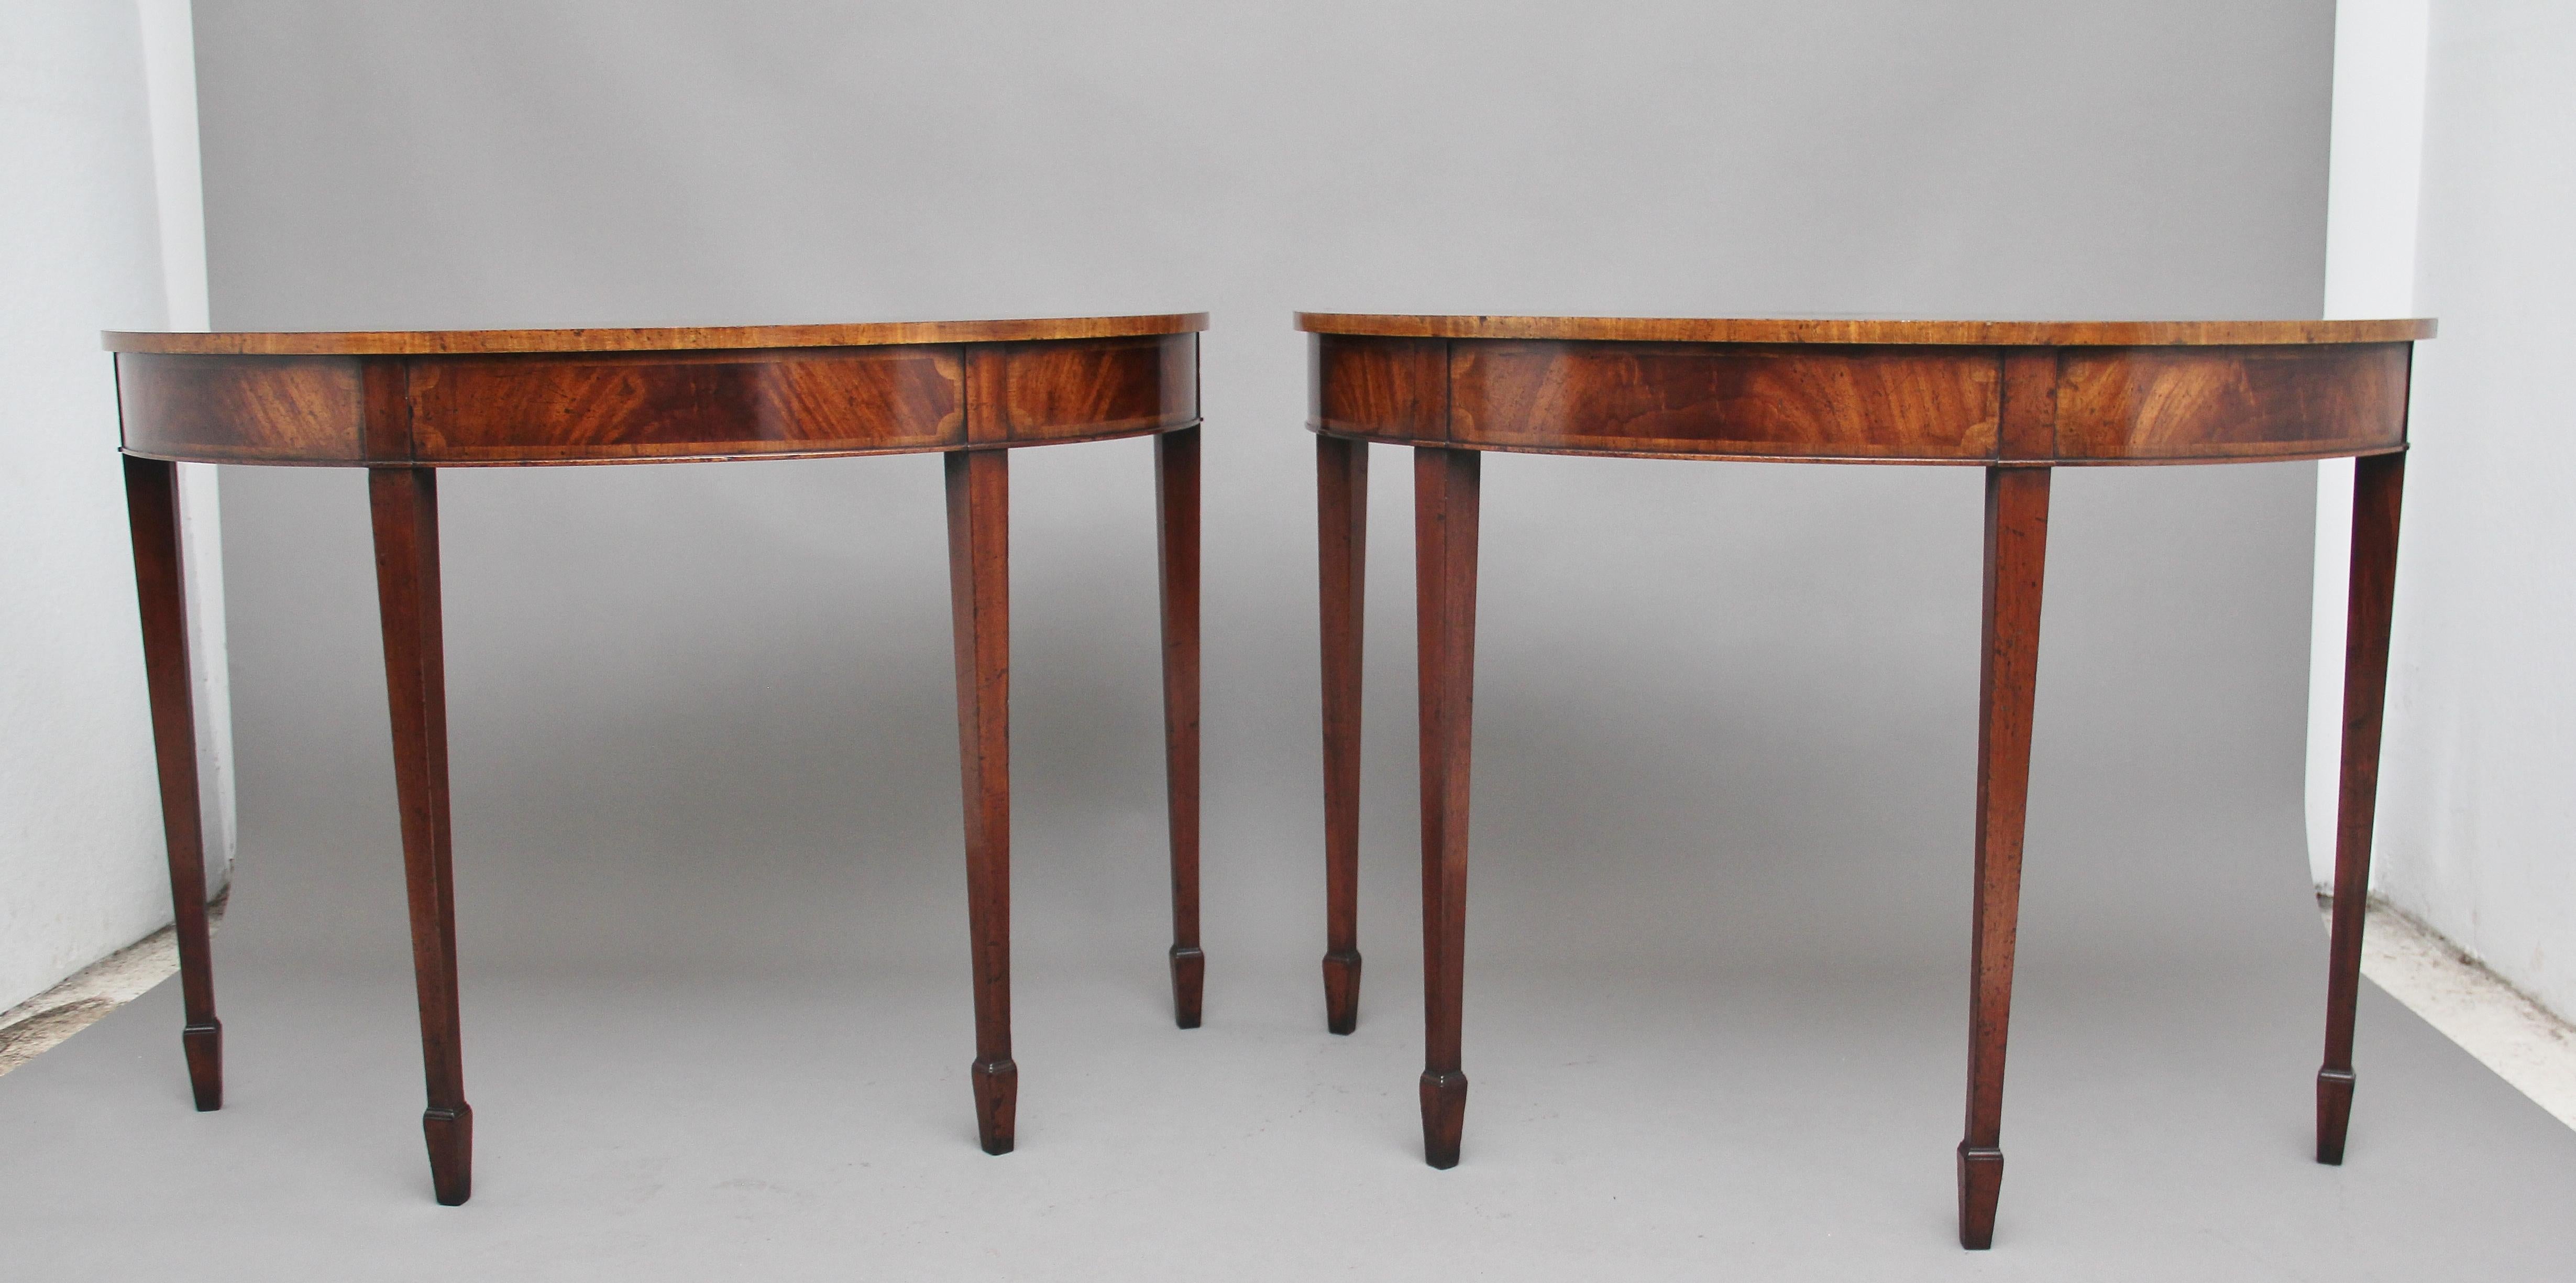 A decorative pair of mid-20th century inlaid mahogany console tables in the Georgian style, the demi lune shaped top crossbanded and having a nice decorative inlaid pattern to the edge, the frieze below is also inlaid, supported on four square